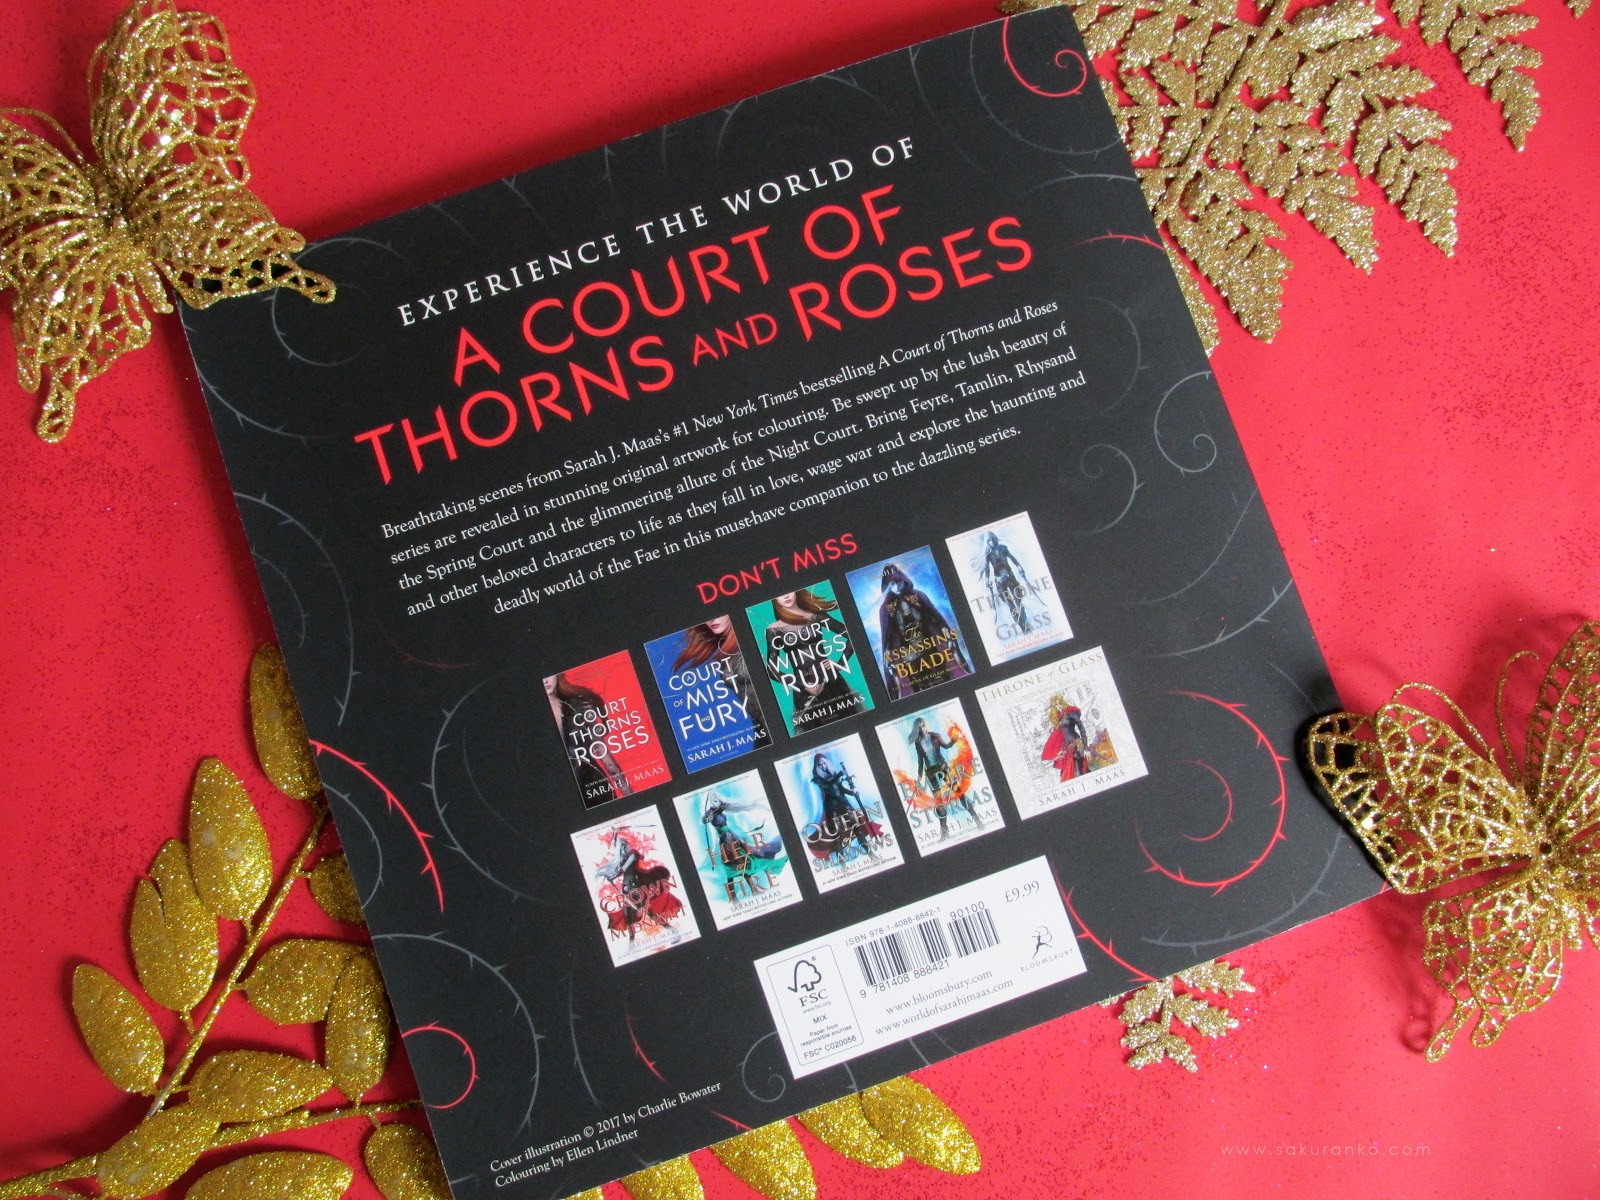 A Court of Thorns and Roses Coloring Book by Sarah J. Maas